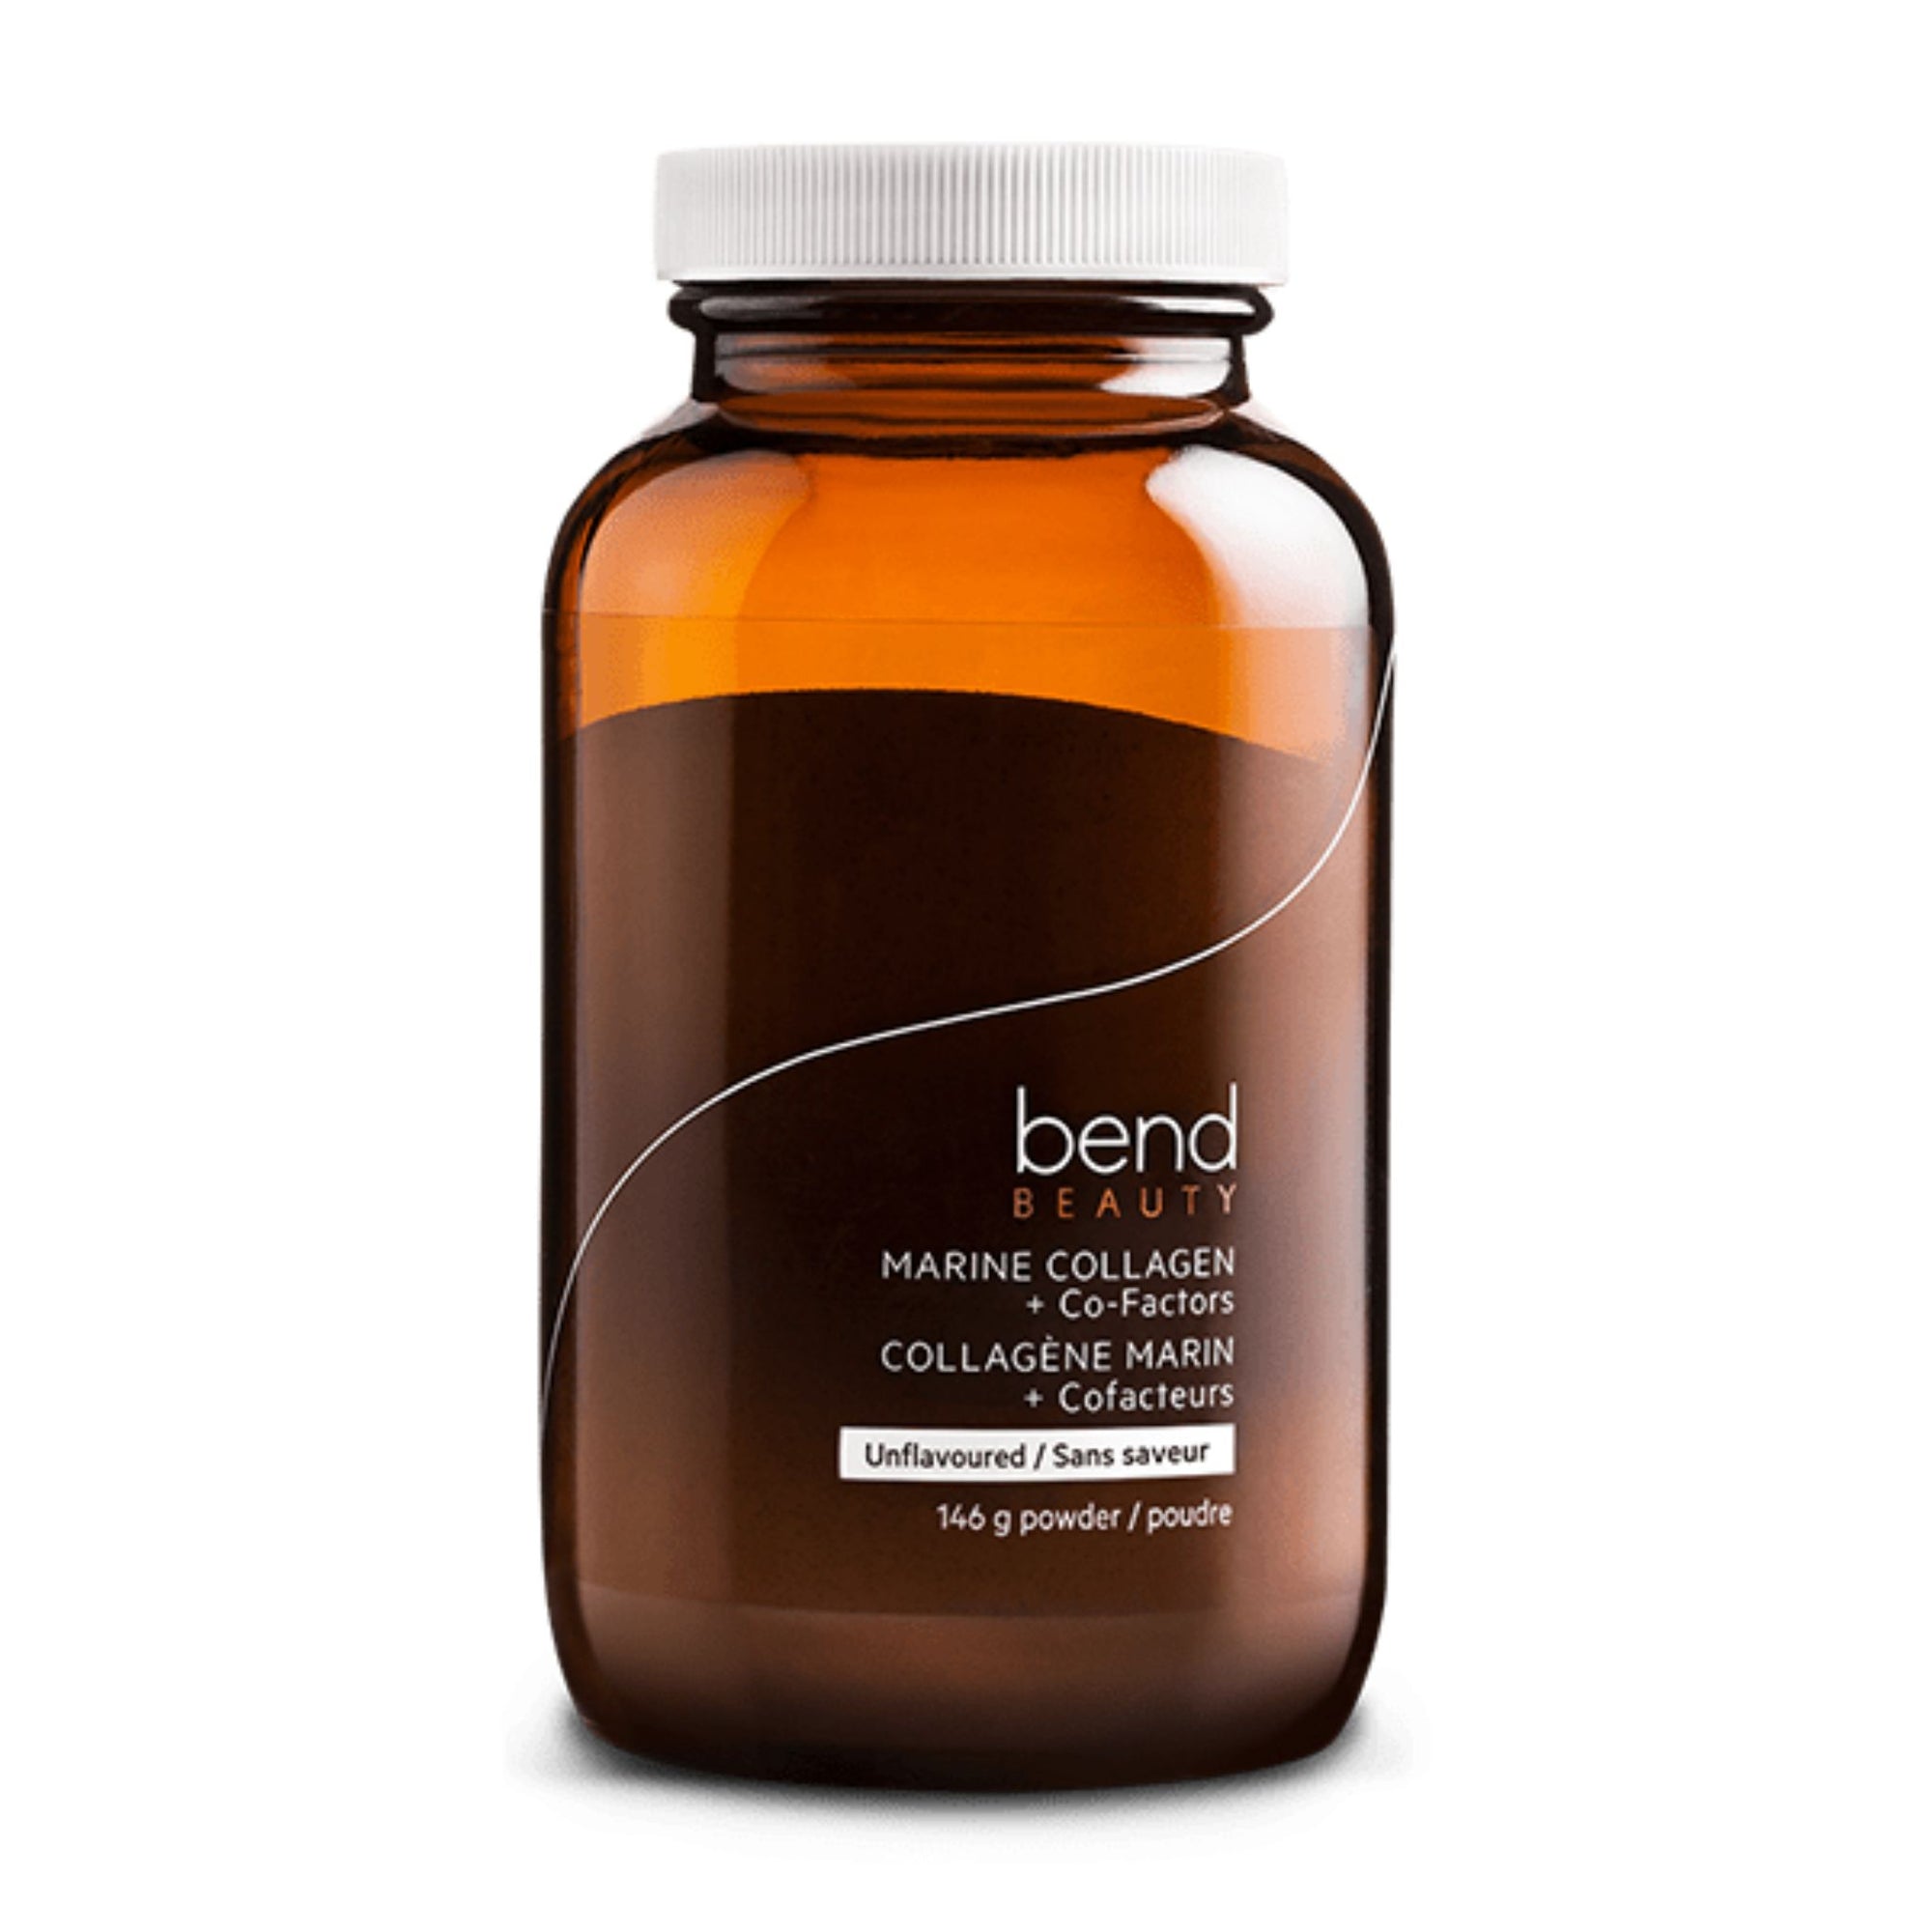 Image of Bend Beauty Marine Collagen + Co-Factors Unflavoured powder, a versatile supplement for skin, hair, and nail health, available at Fiddleheads Health and Nutrition.